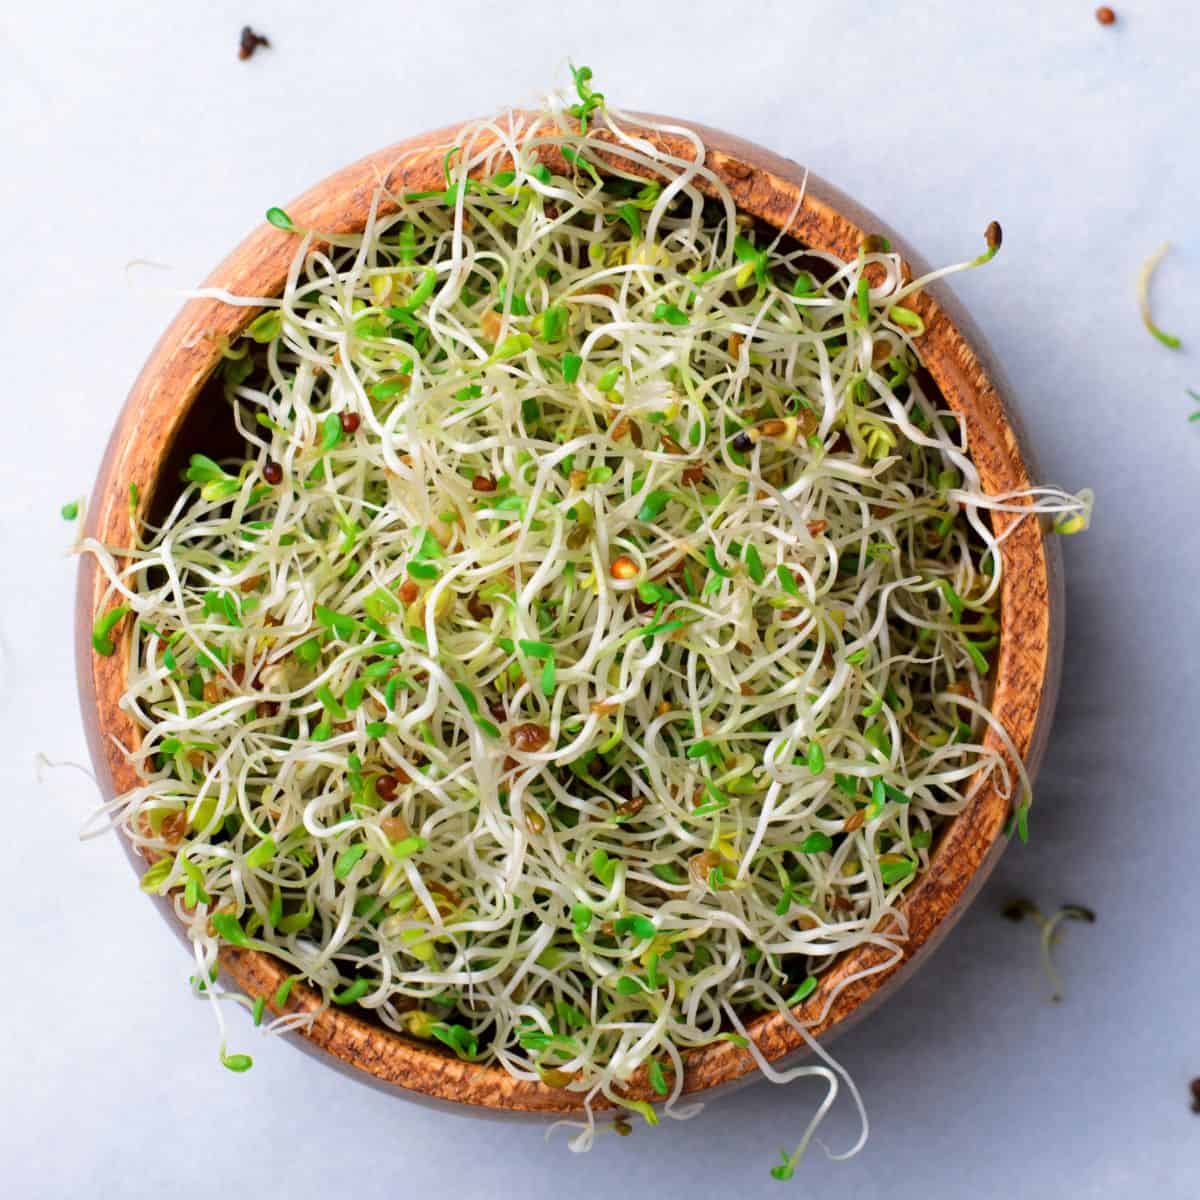 Alfalfa sprouts in a wooden bowl on a white background.